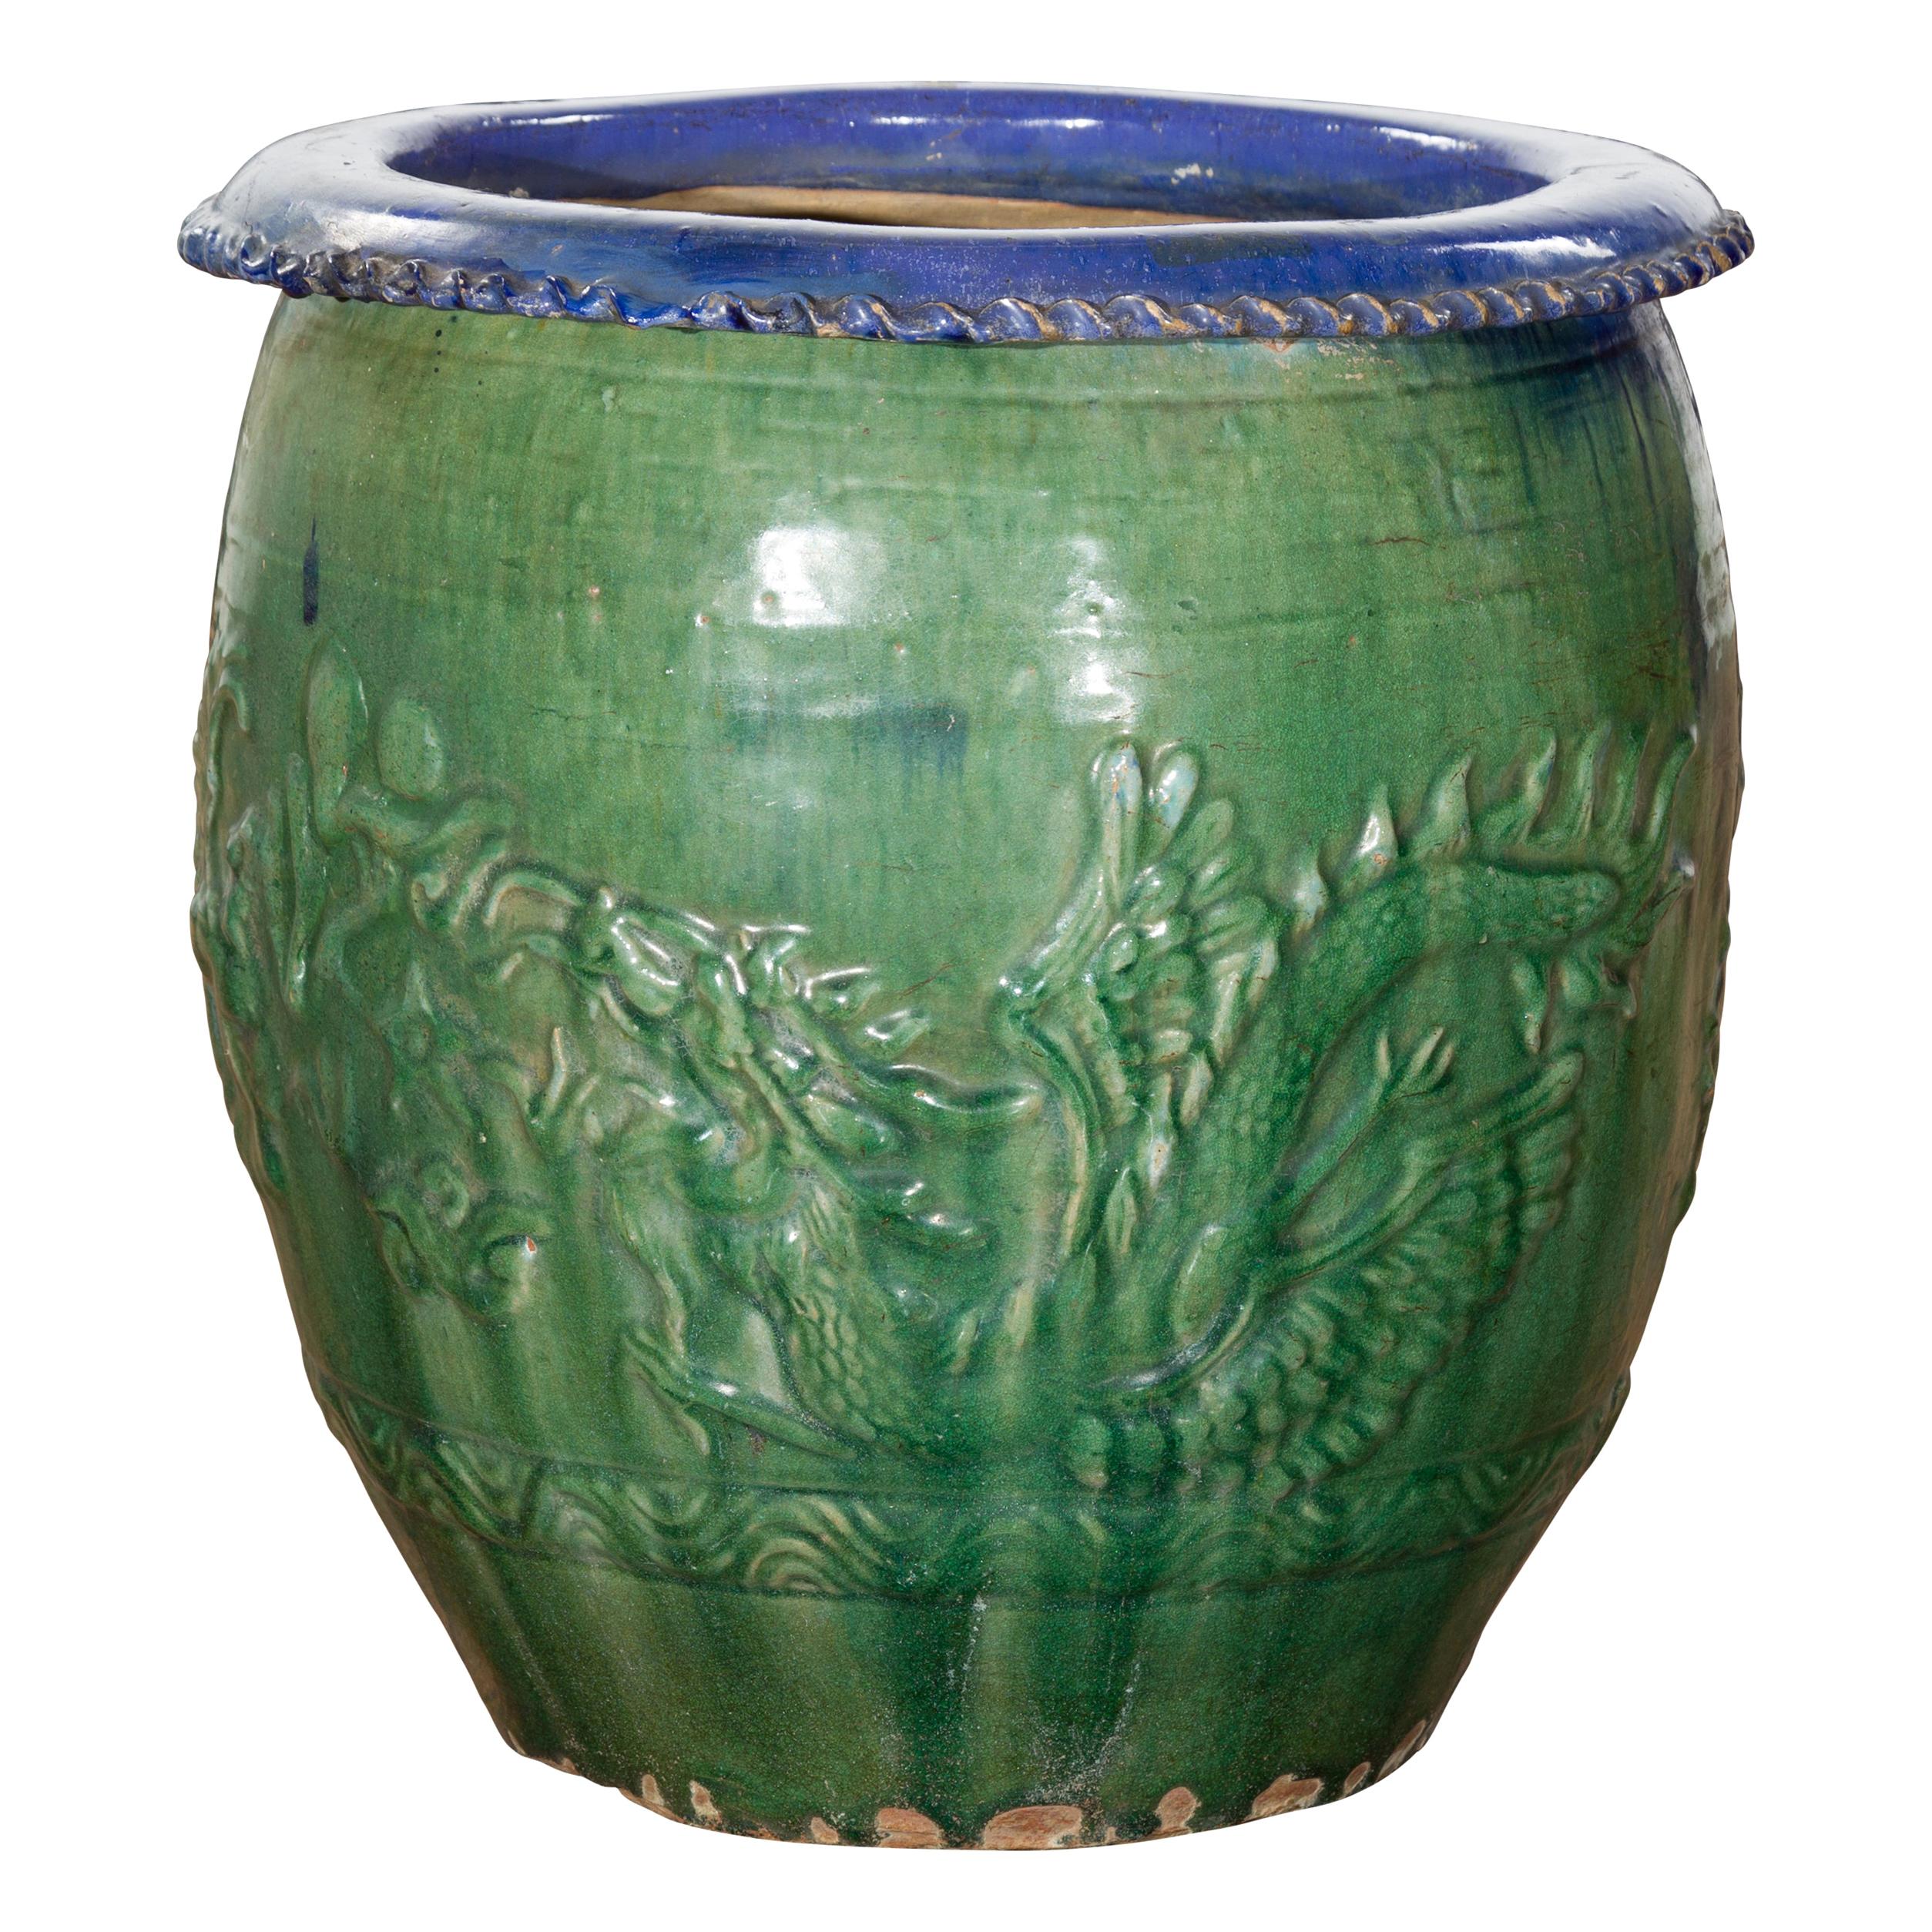 Chinese Vintage Green and Blue Glazed Garden Planter with Raised Animal Décor